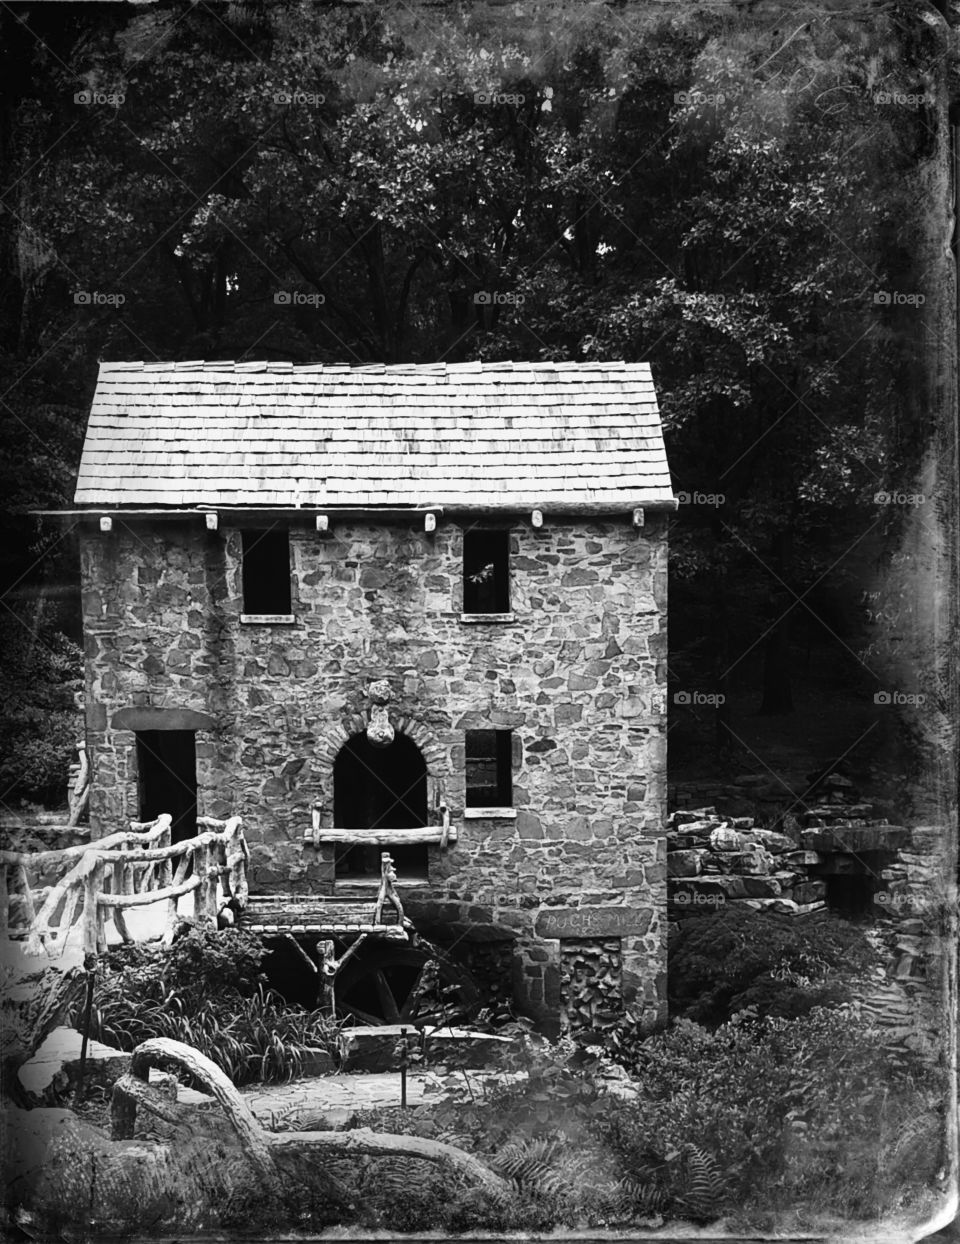 Older Mill. old style edit of a previous picture of the Old Mill in Arkansas.